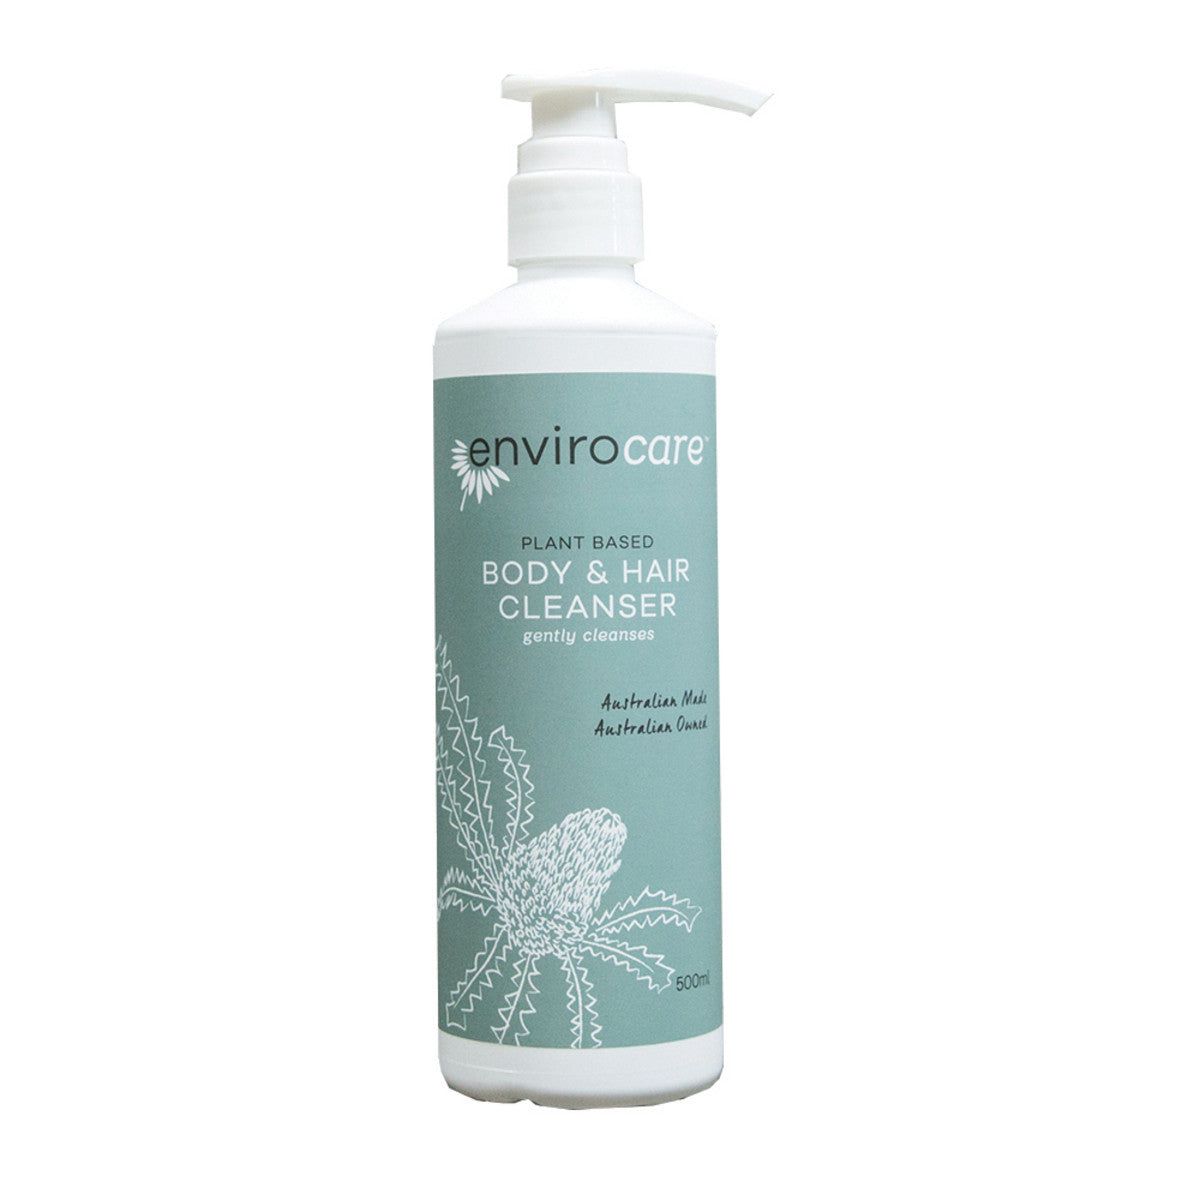 EnviroCare - Body and Hair Cleanser 500ml